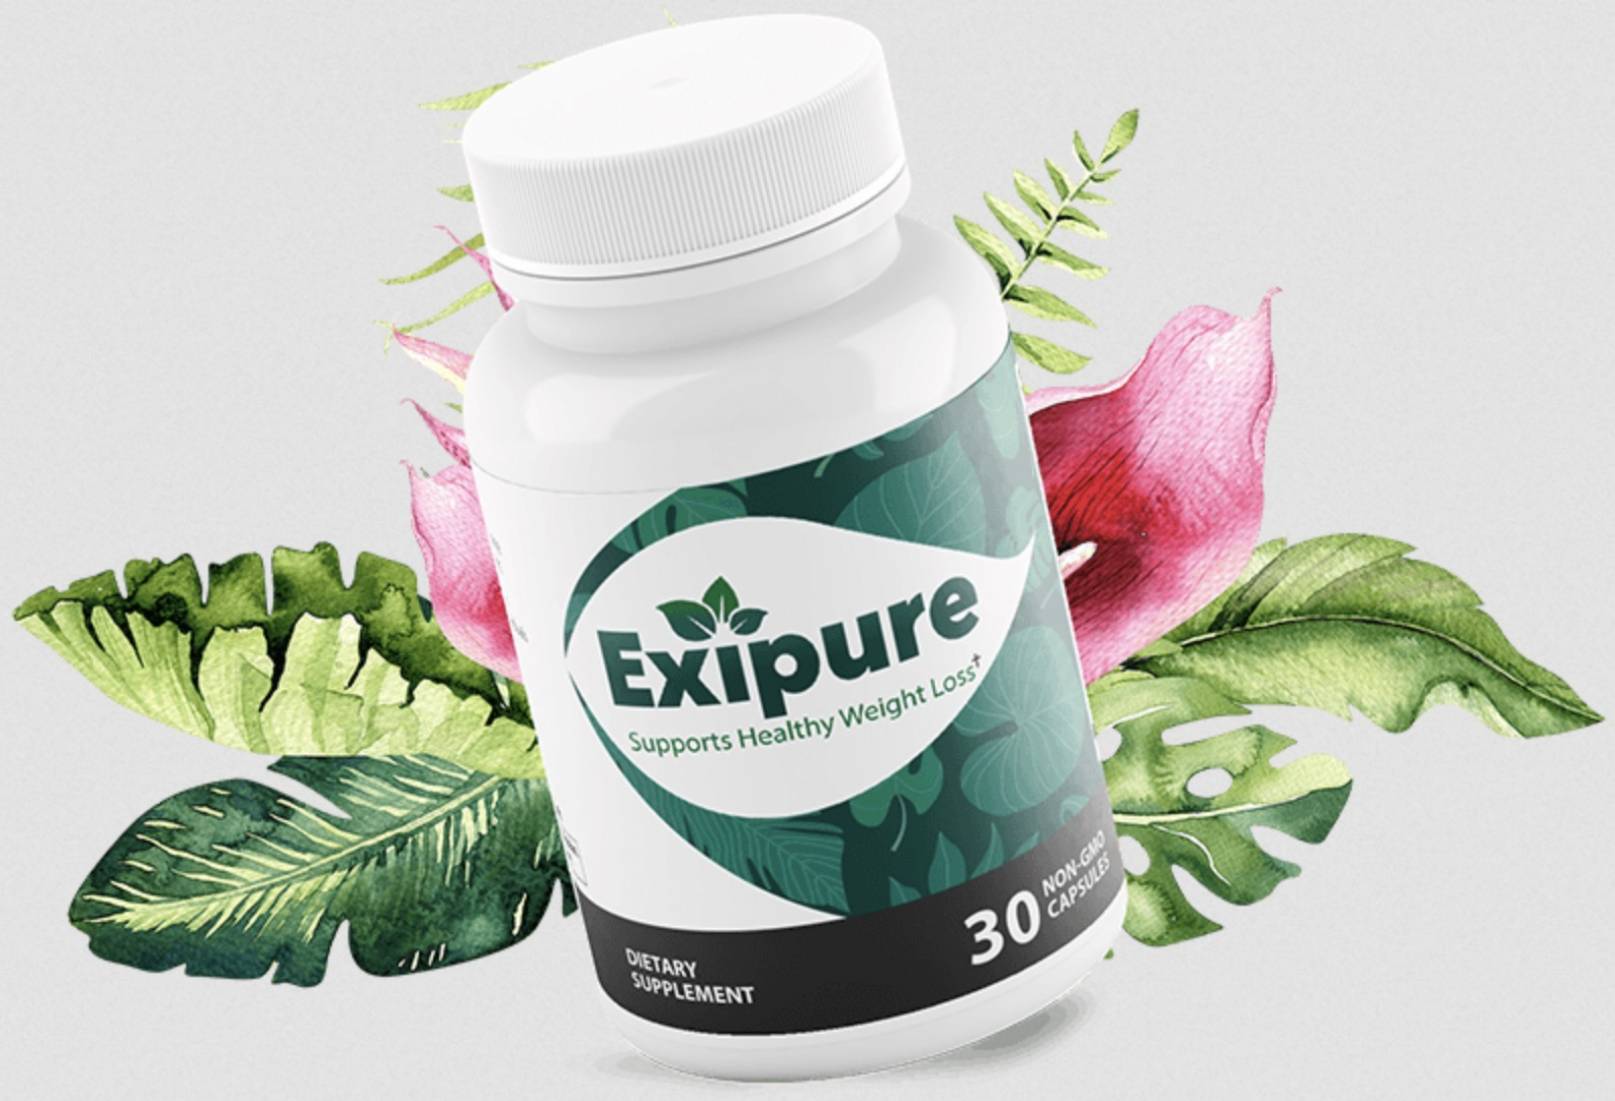 Exipure Supports Healthy Weight Loss